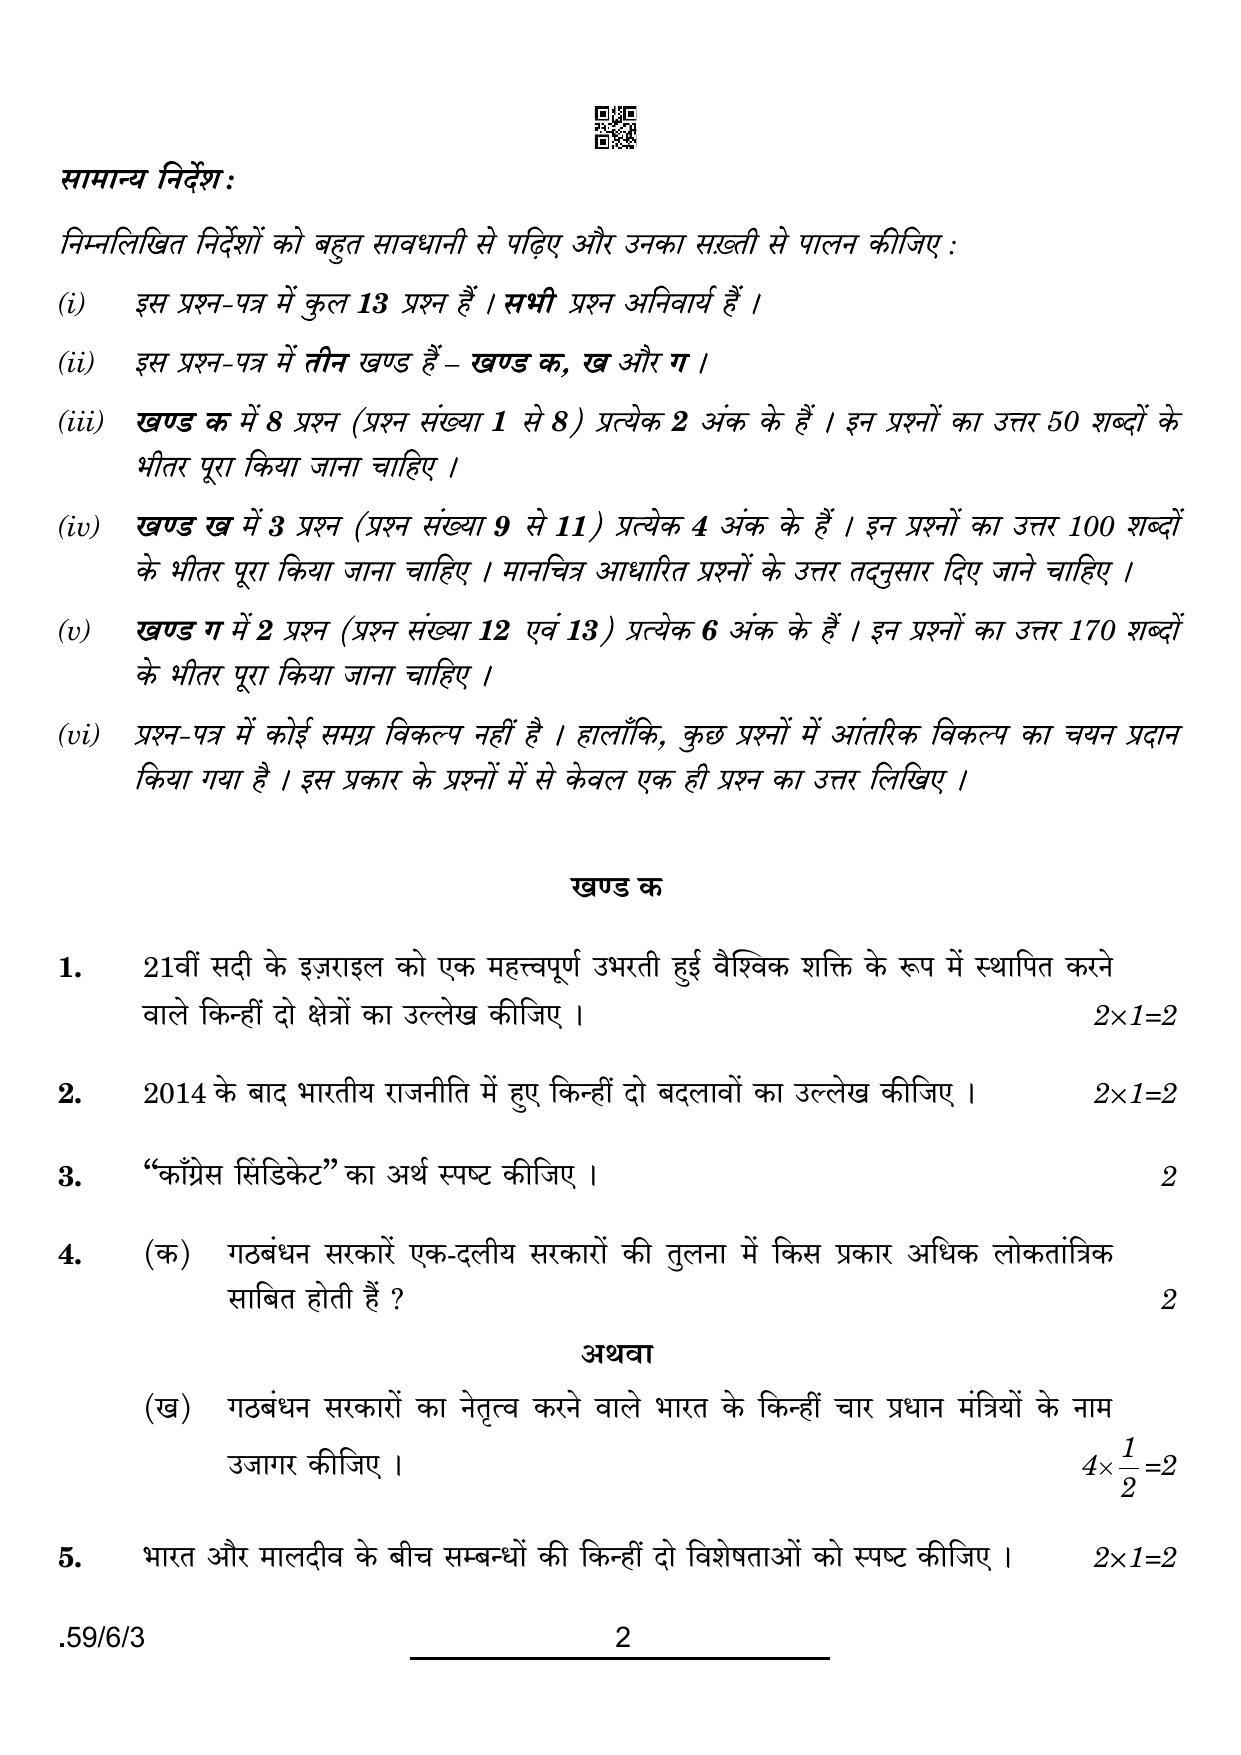 CBSE Class 12 59-6-3 POL SCIENCE 2022 Compartment Question Paper - Page 2